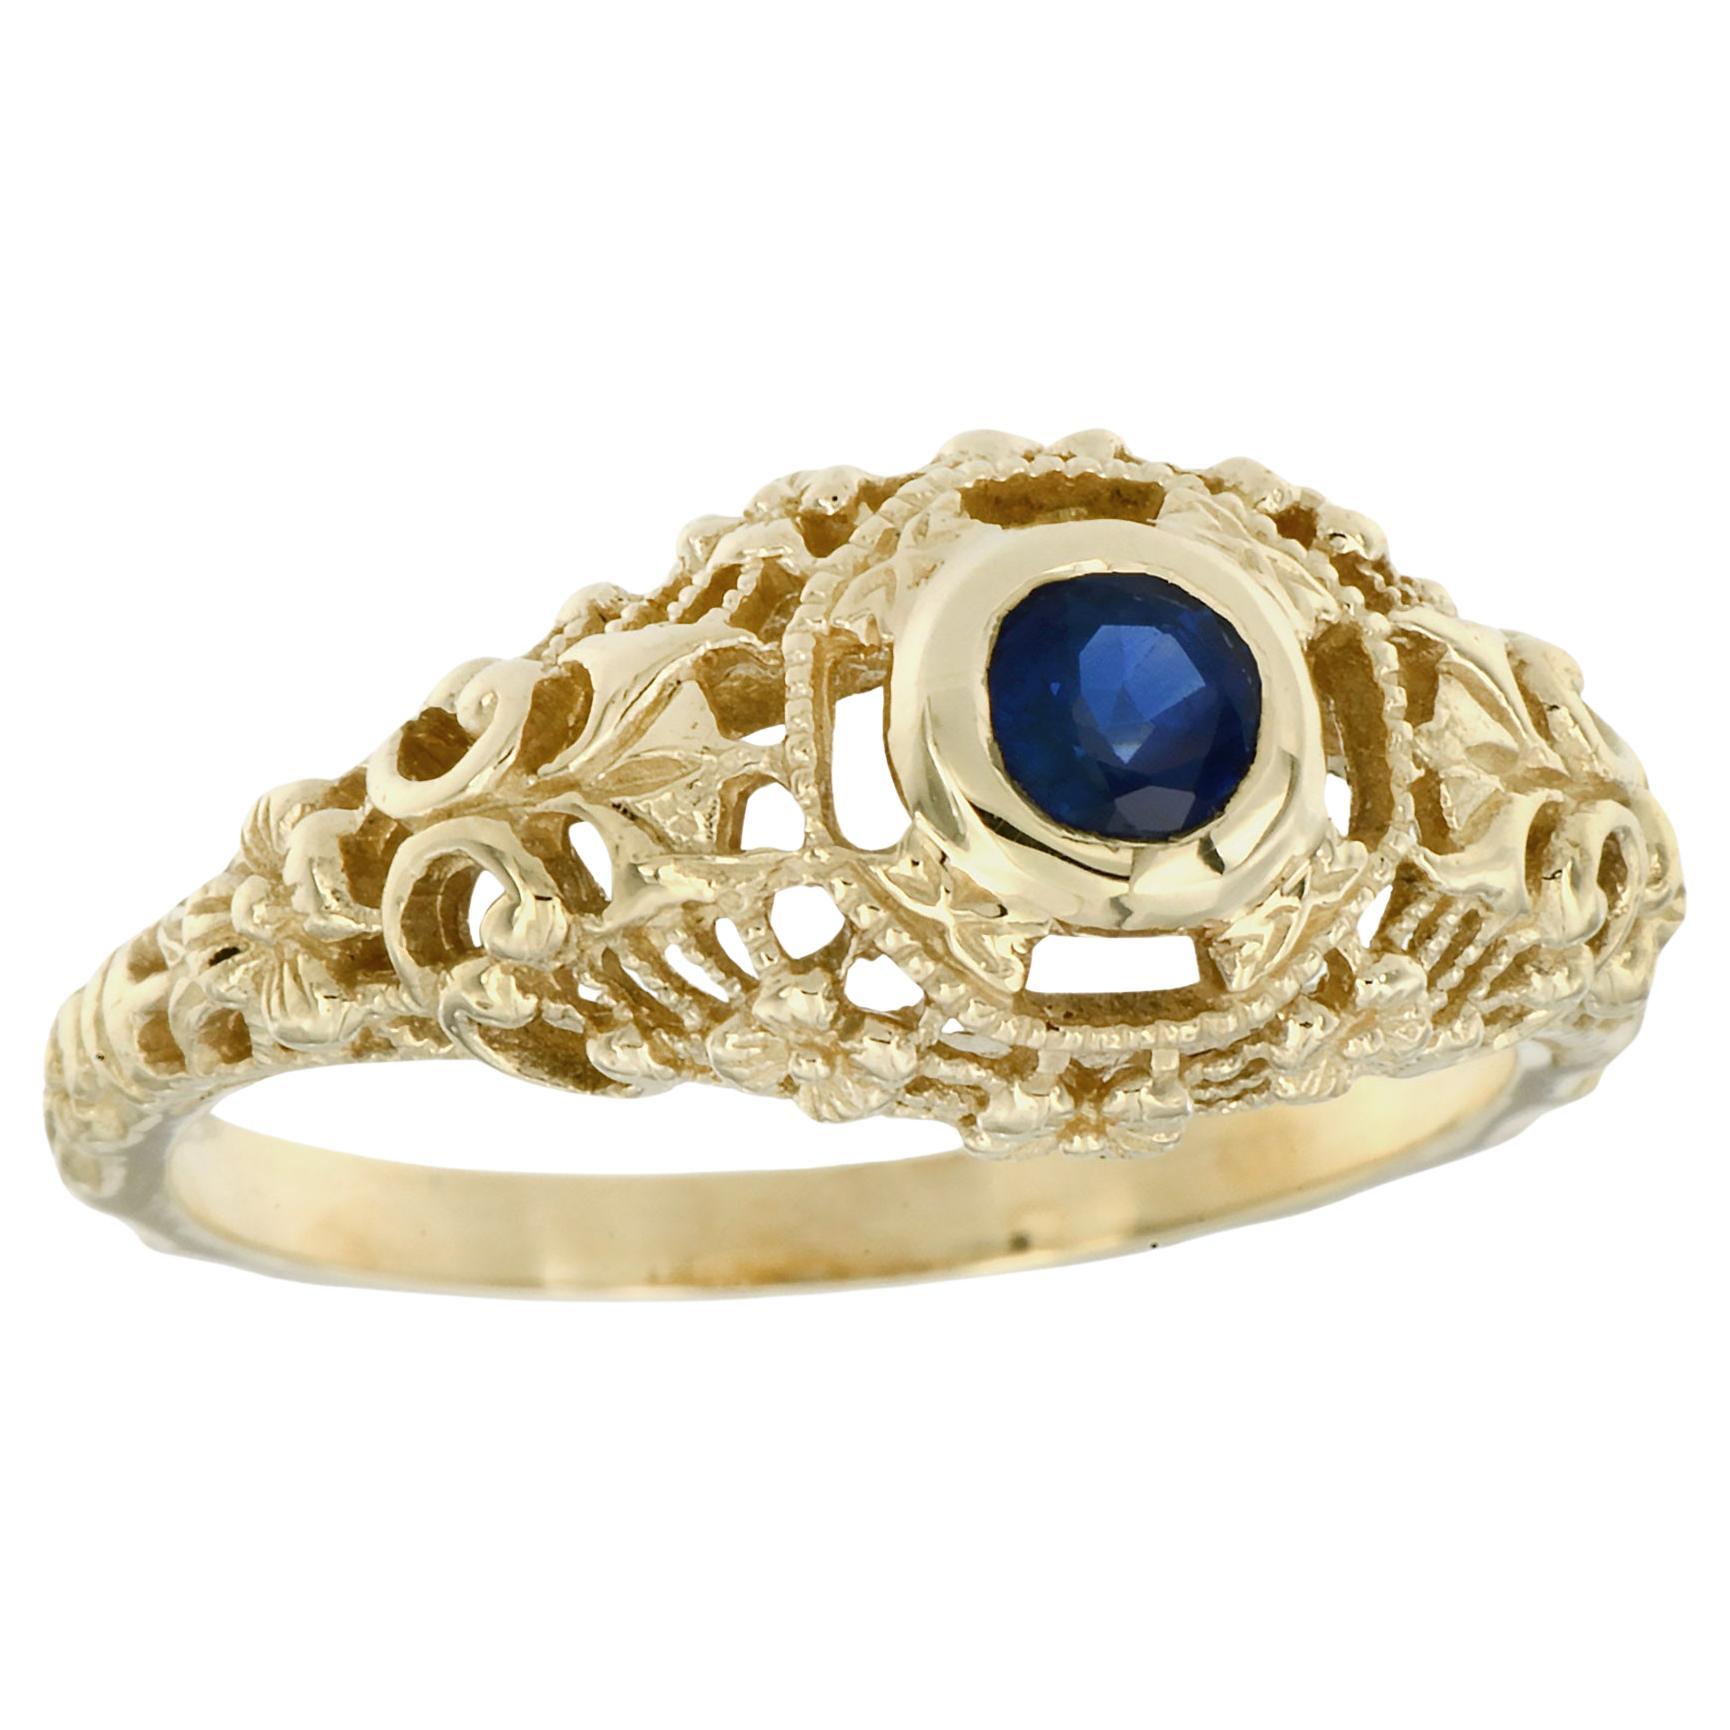 Natural Blue Sapphire Vintage Style Filigree Ring in Solid 9K Yellow Gold